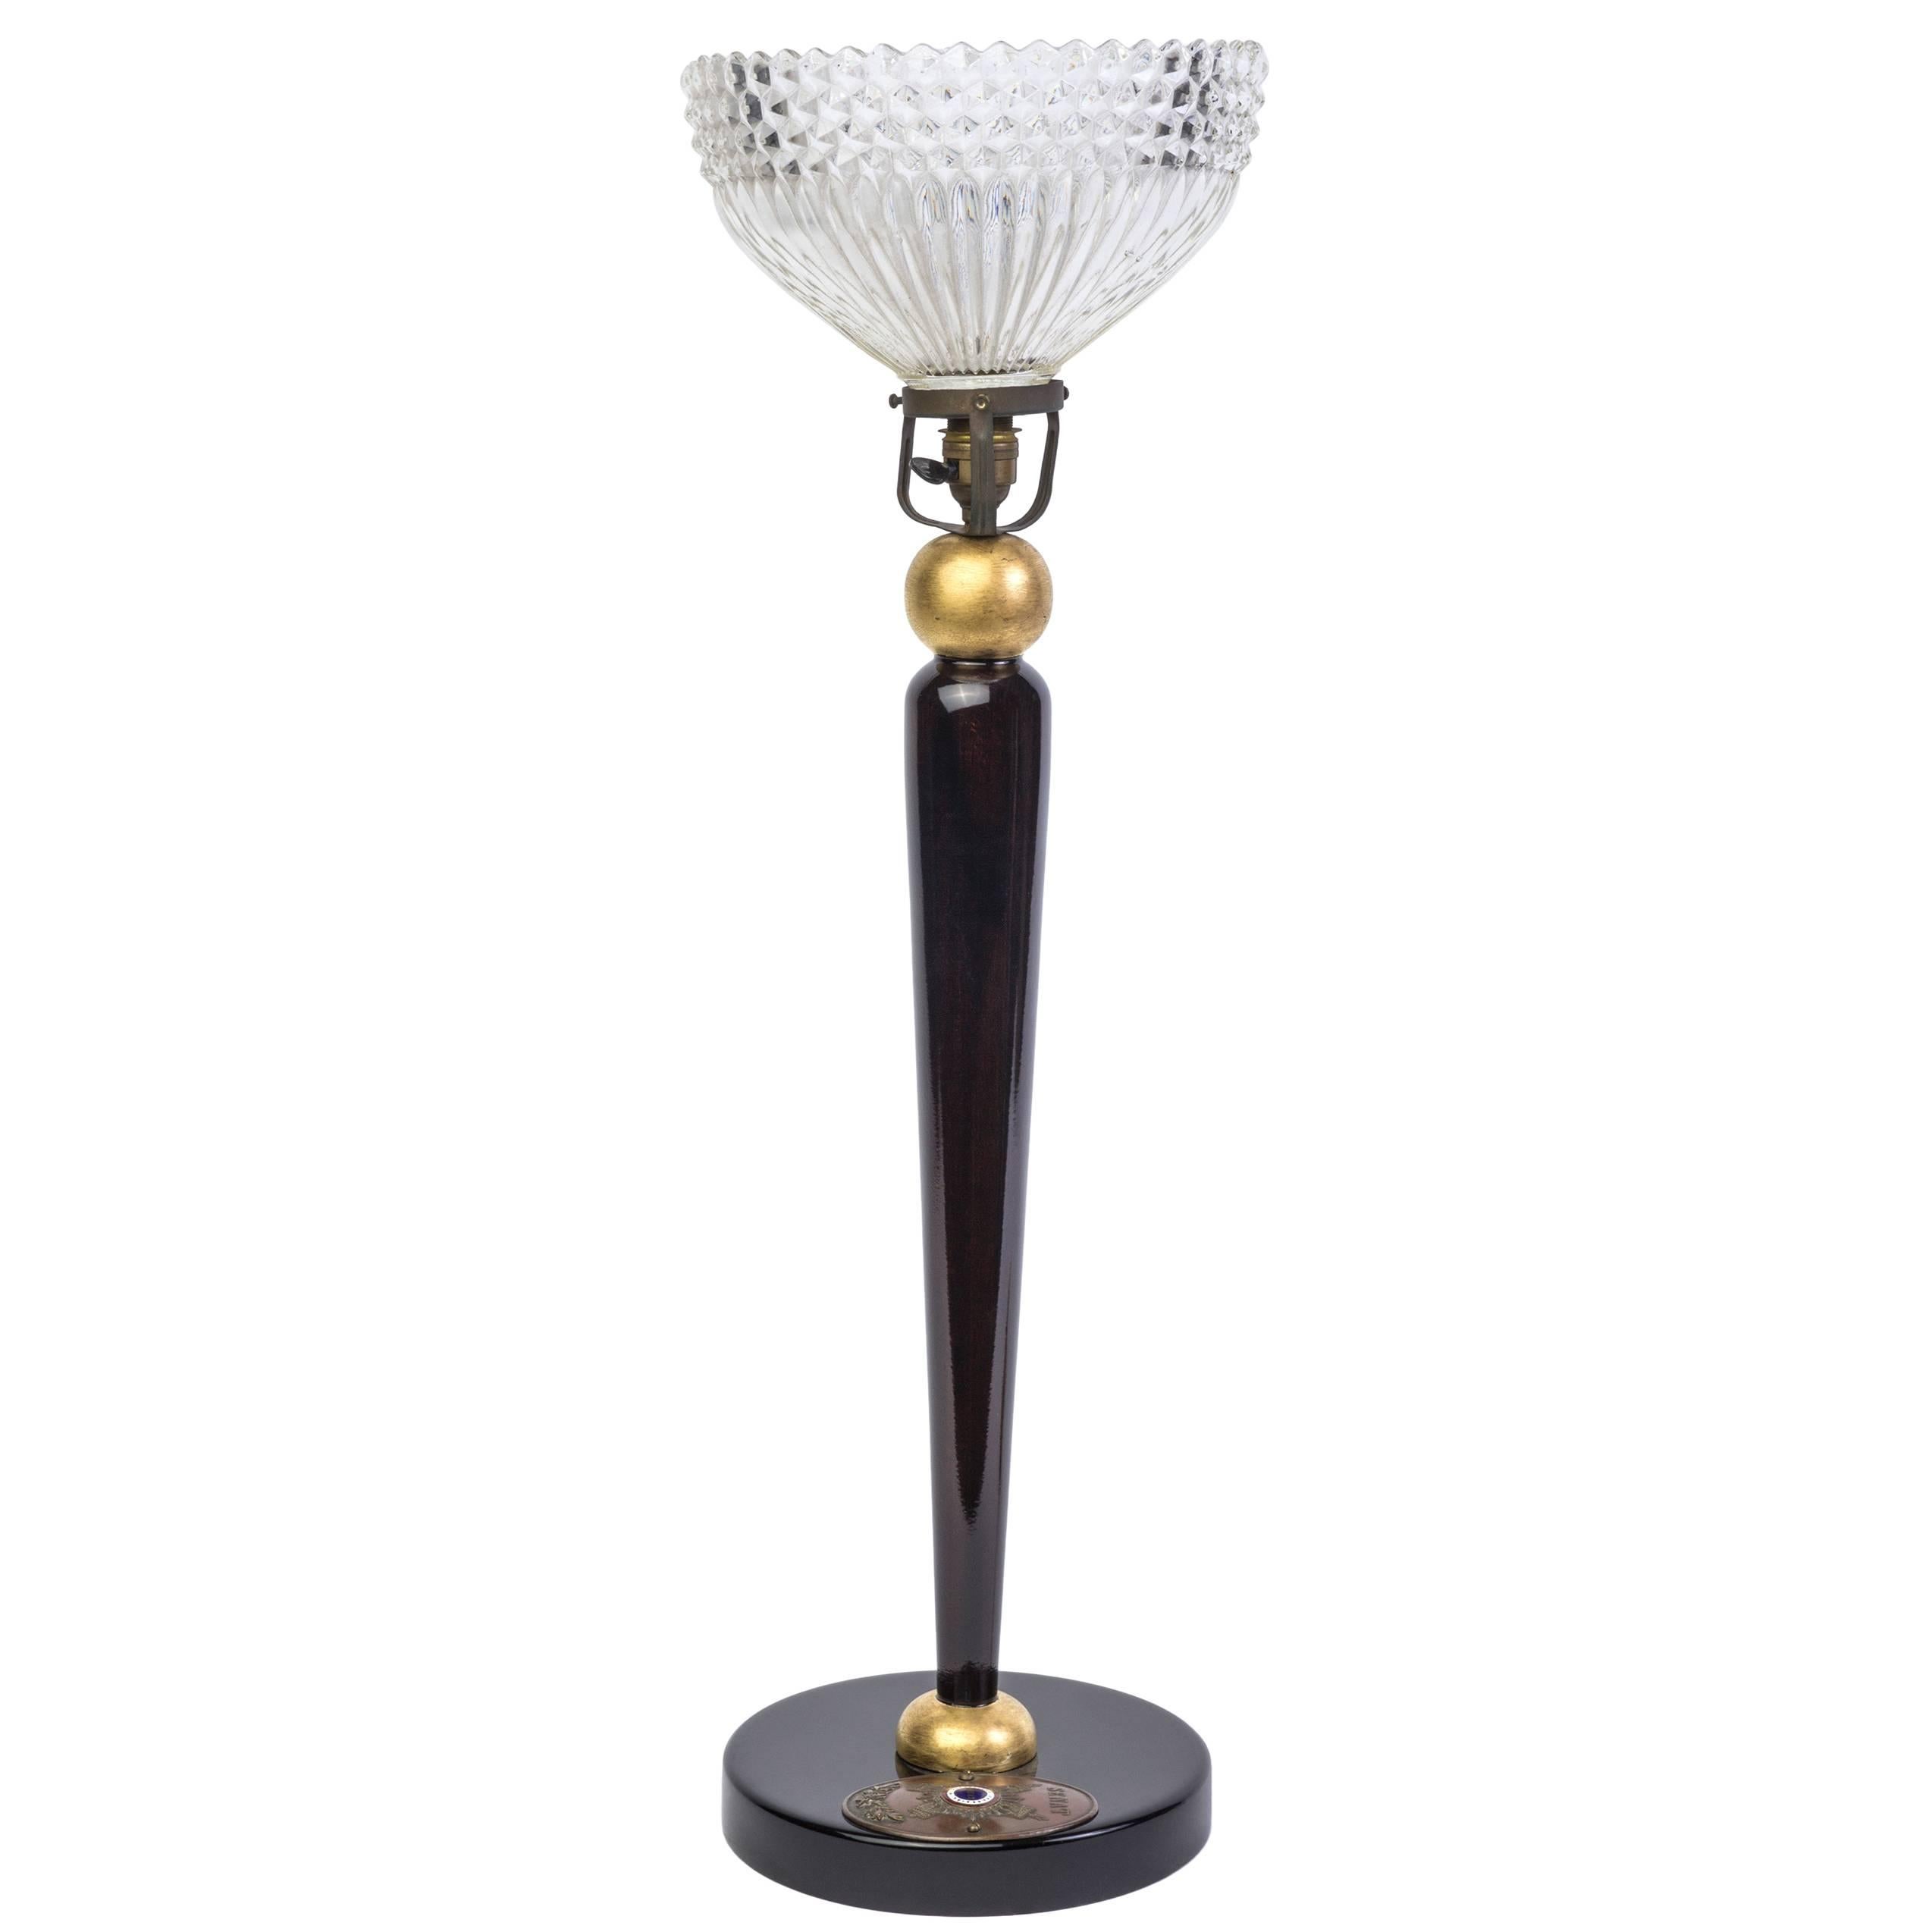 Pre-War French Art Deco Table Lamp For Sale